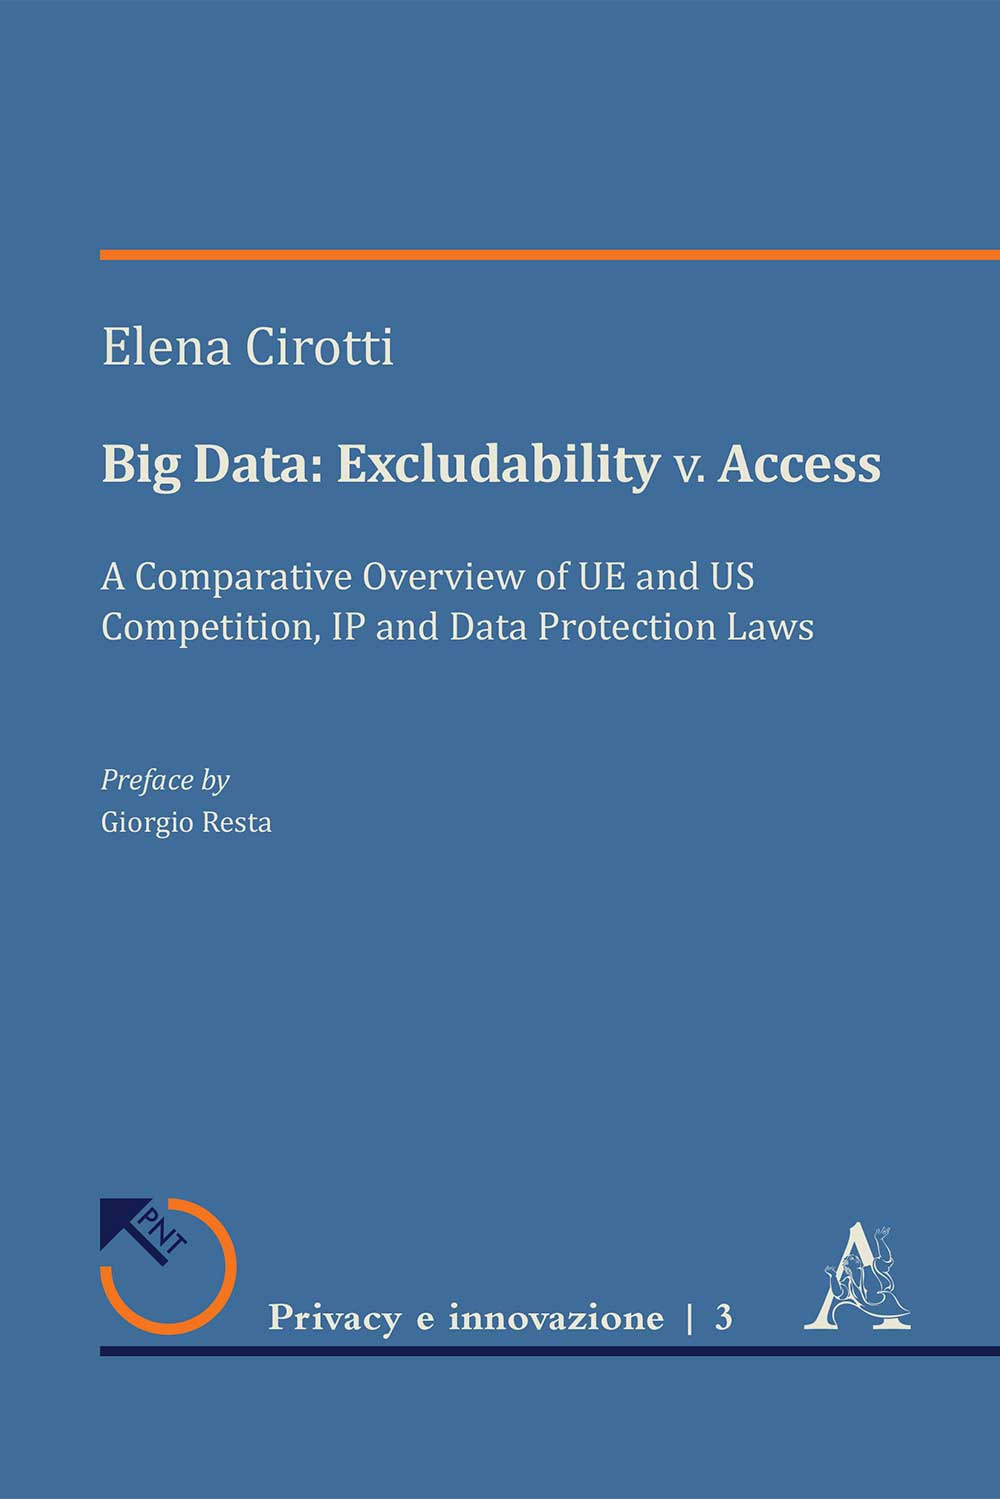 Big Data: excludability v. access. A comparative overview of UE and US competition, IP and Data Protection laws